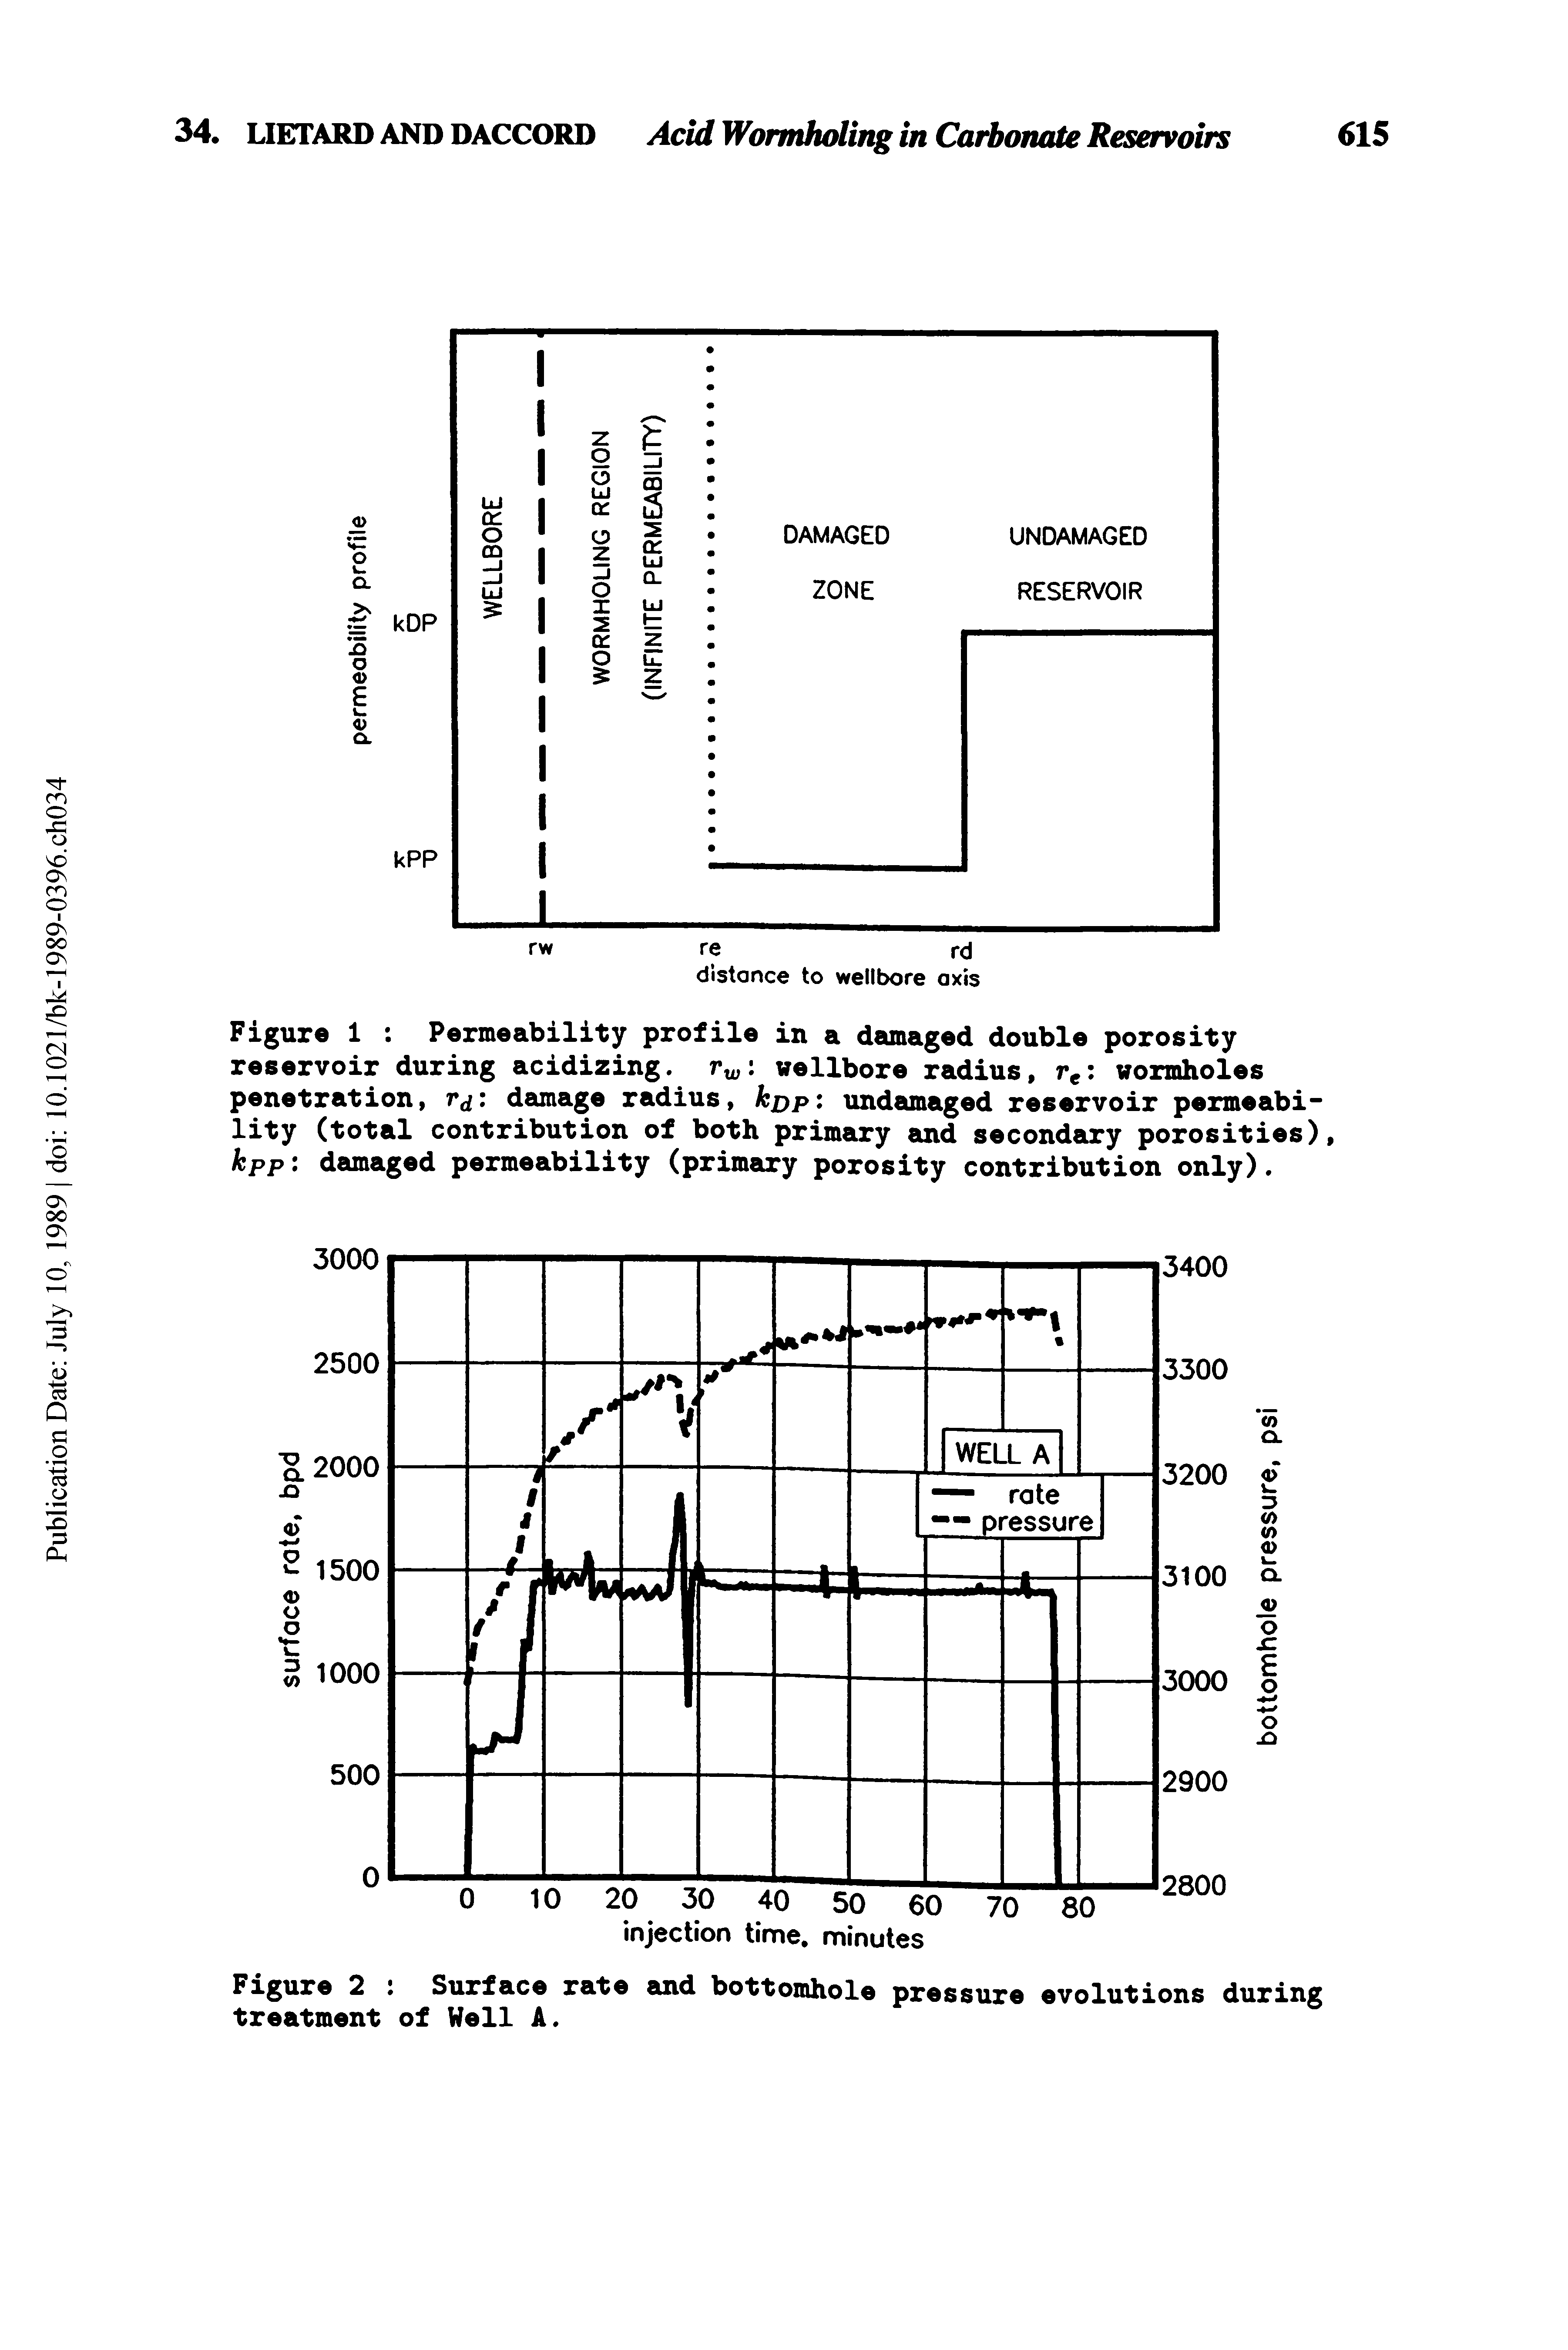 Figure 2 Surface rate and bottomhole pressure evolutions during treatment of Well A.